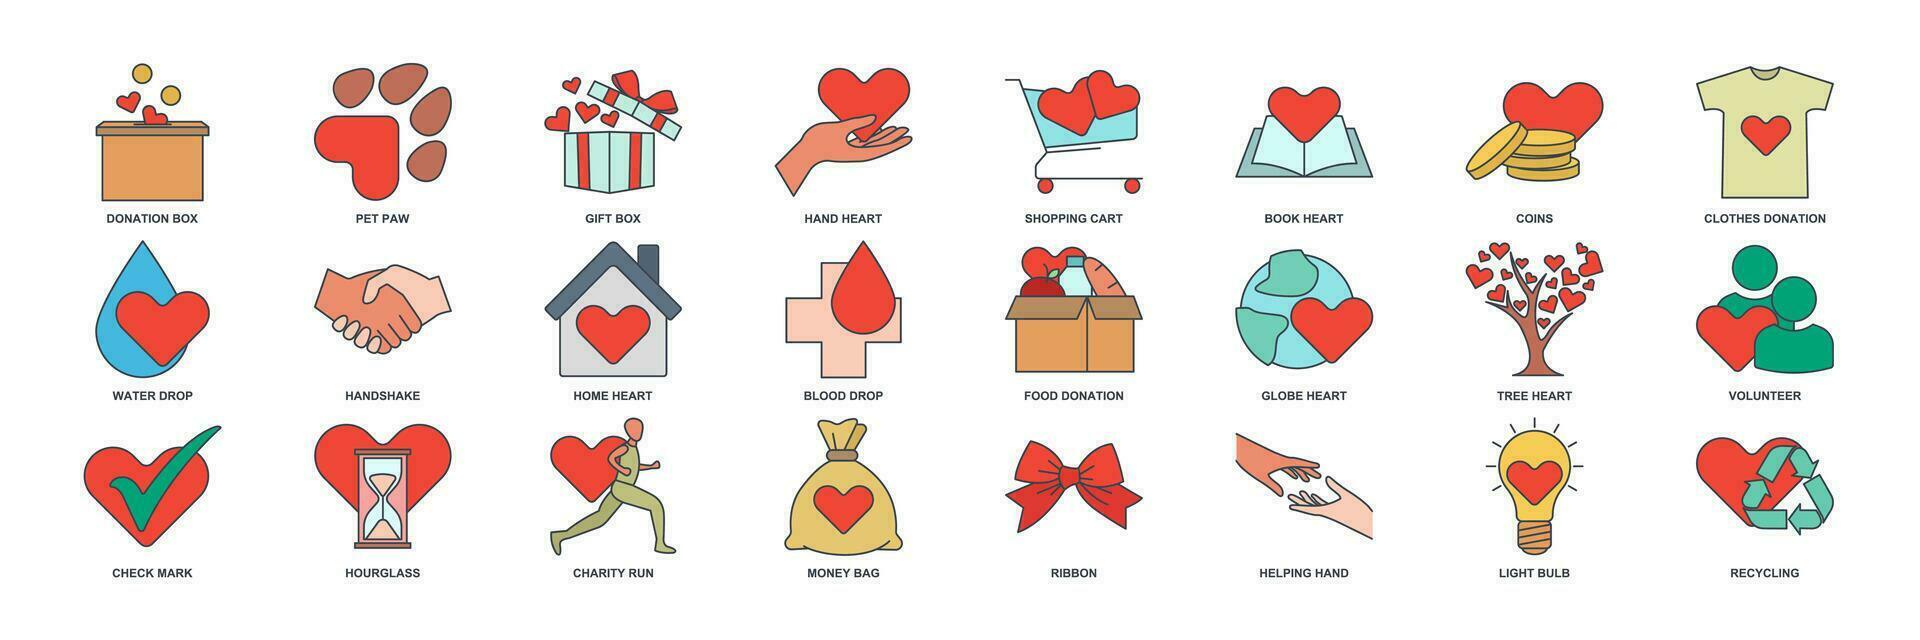 Charity, Kindness, Donation icon set, Included icons as Donation Box, Handshake, Volunteer and more symbols collection, logo isolated vector illustration